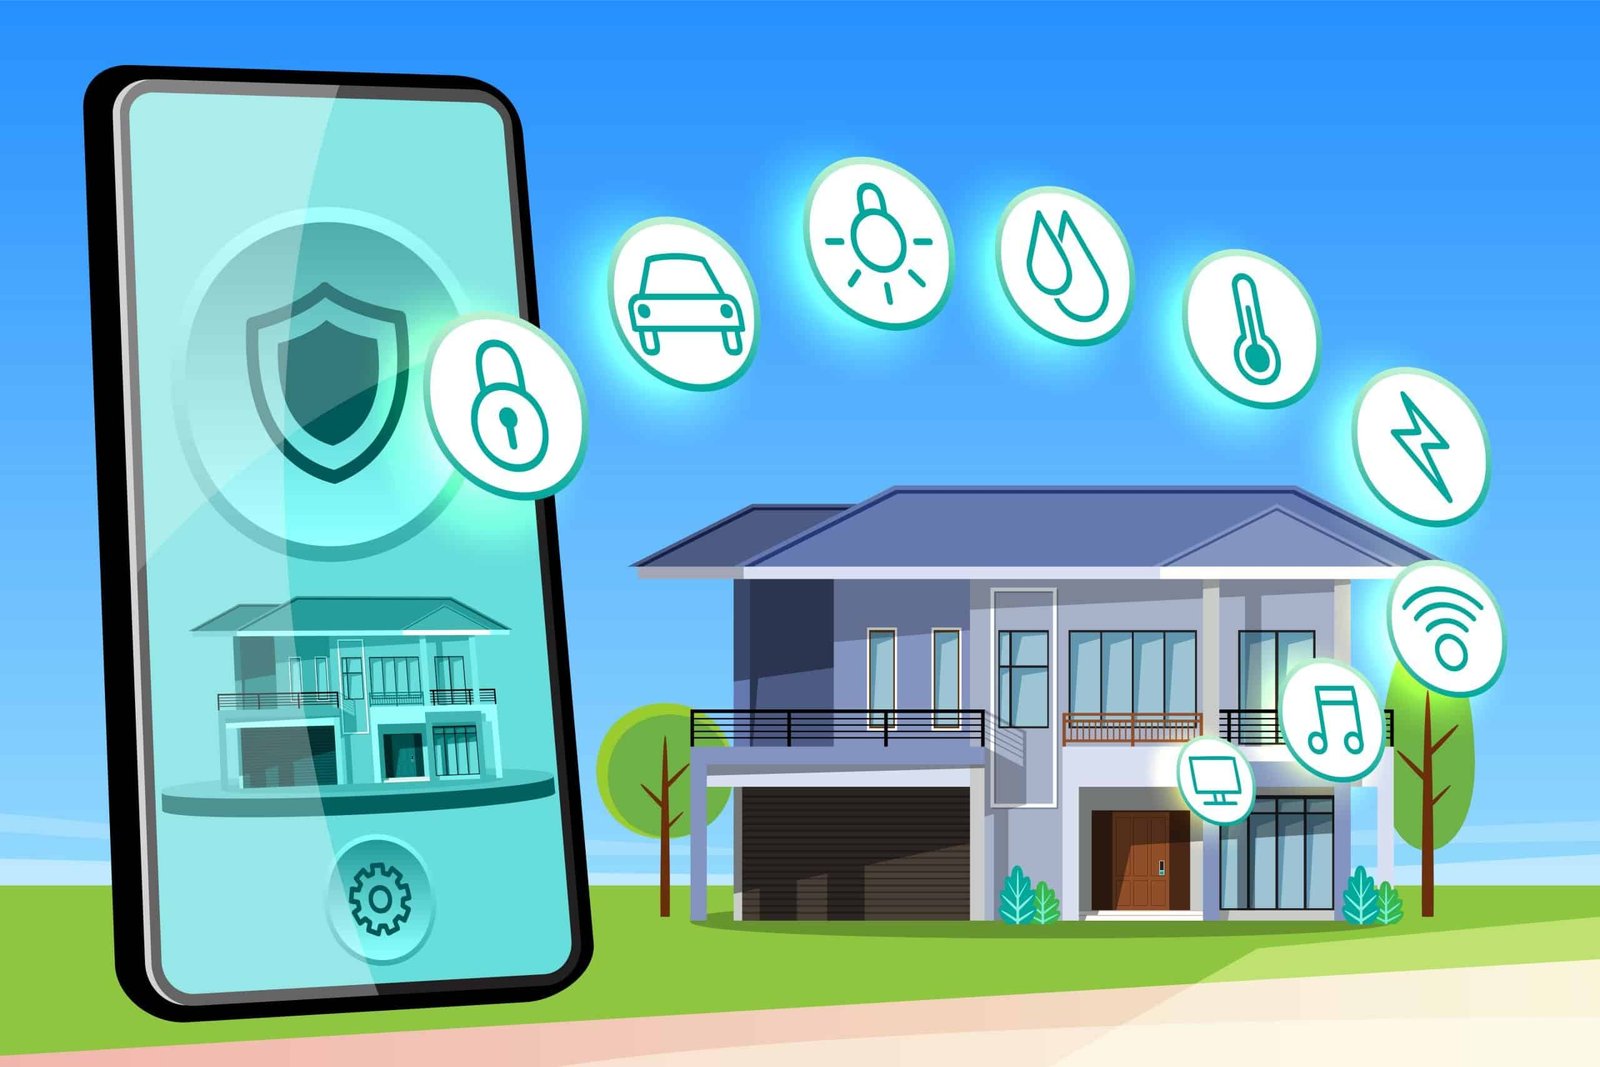 Smart Security Systems for Home Safety